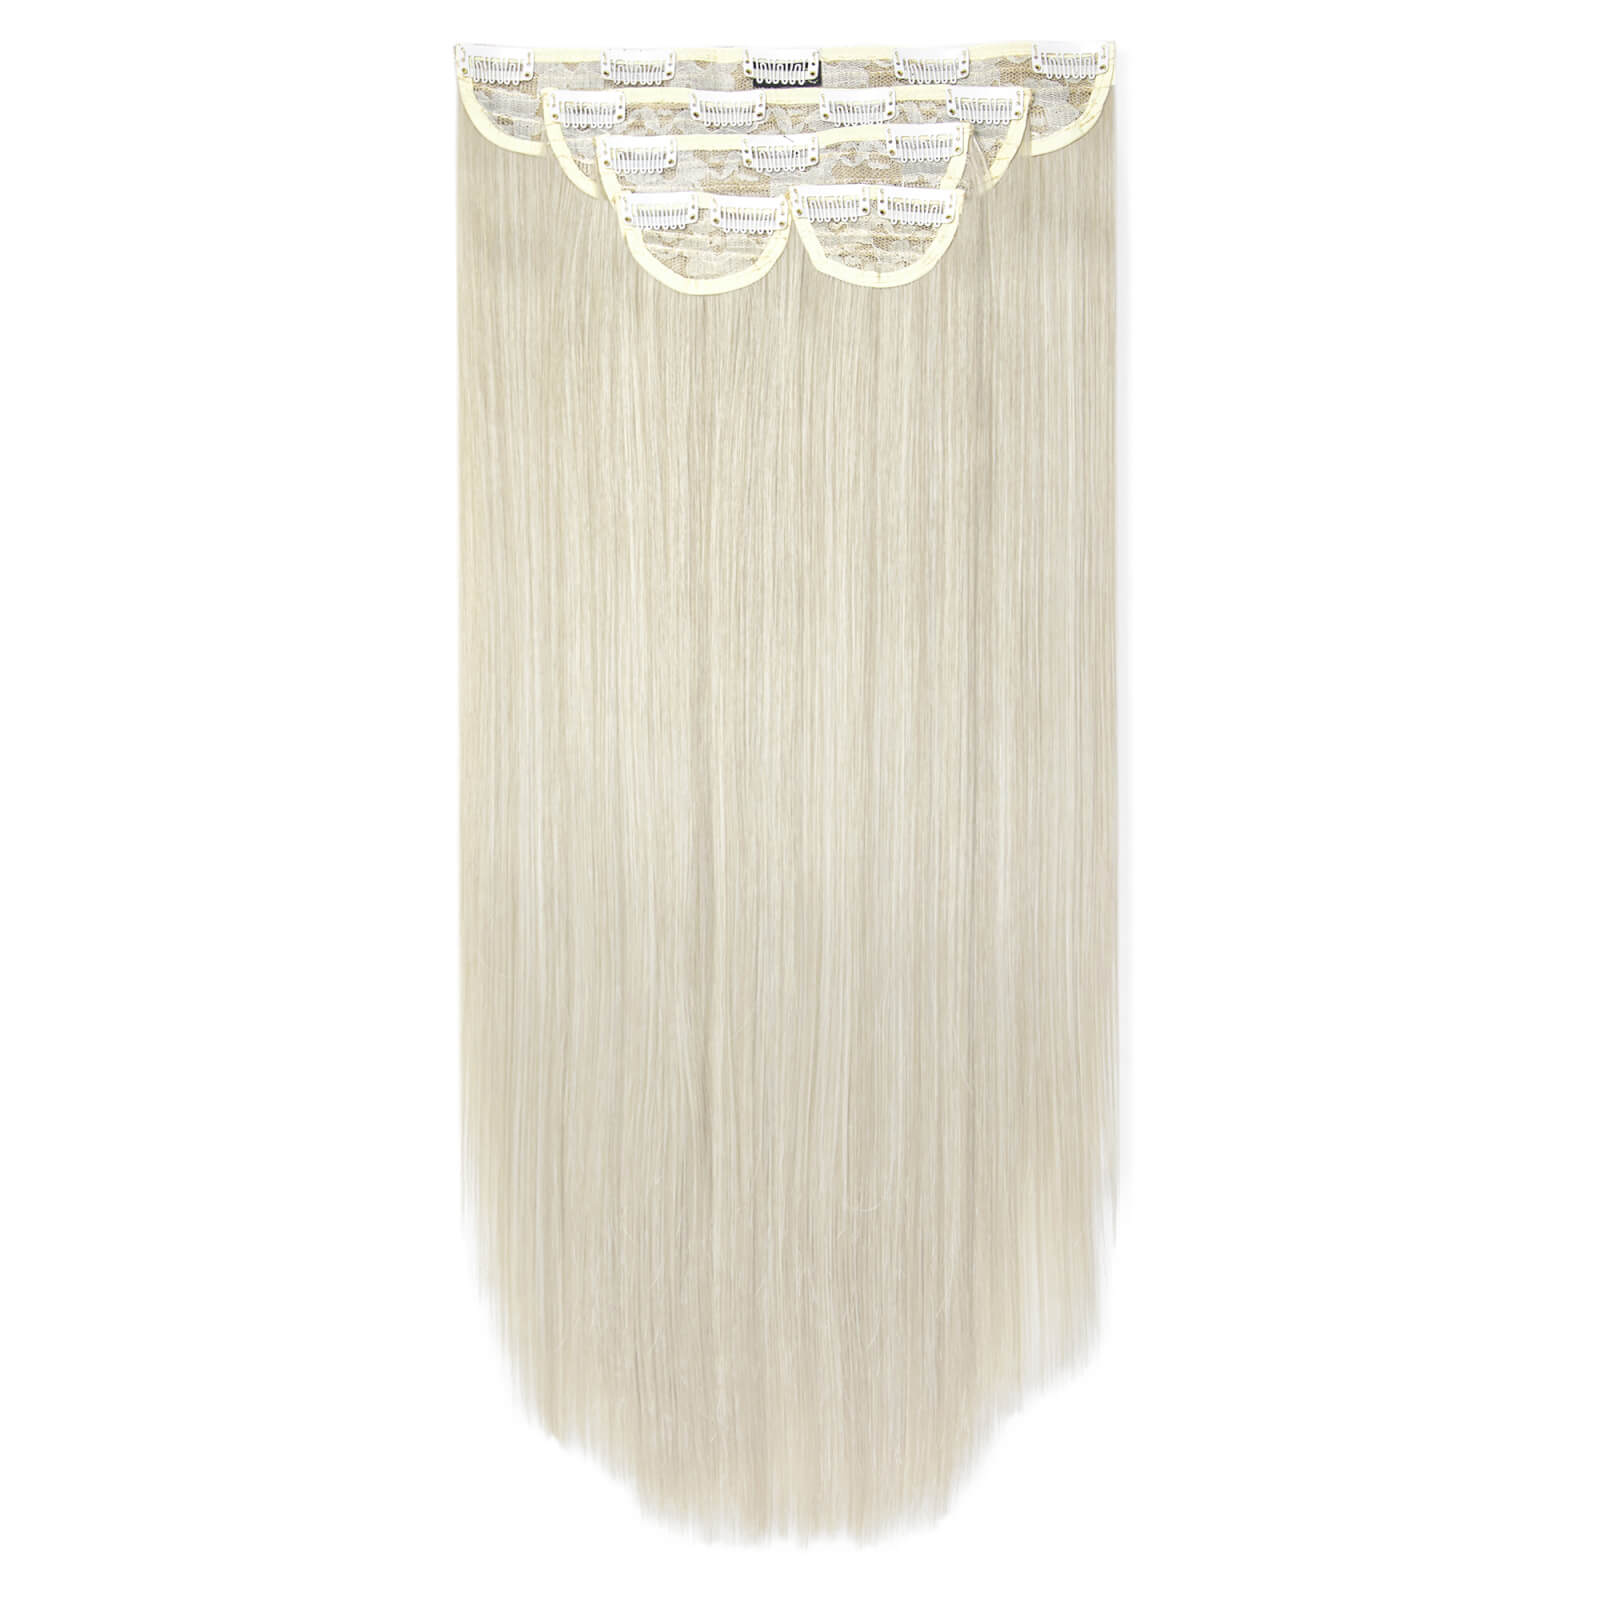 Image of LullaBellz Super Thick 22 5 Piece Straight Clip In Extensions (Various Shades) - Bleach Blonde